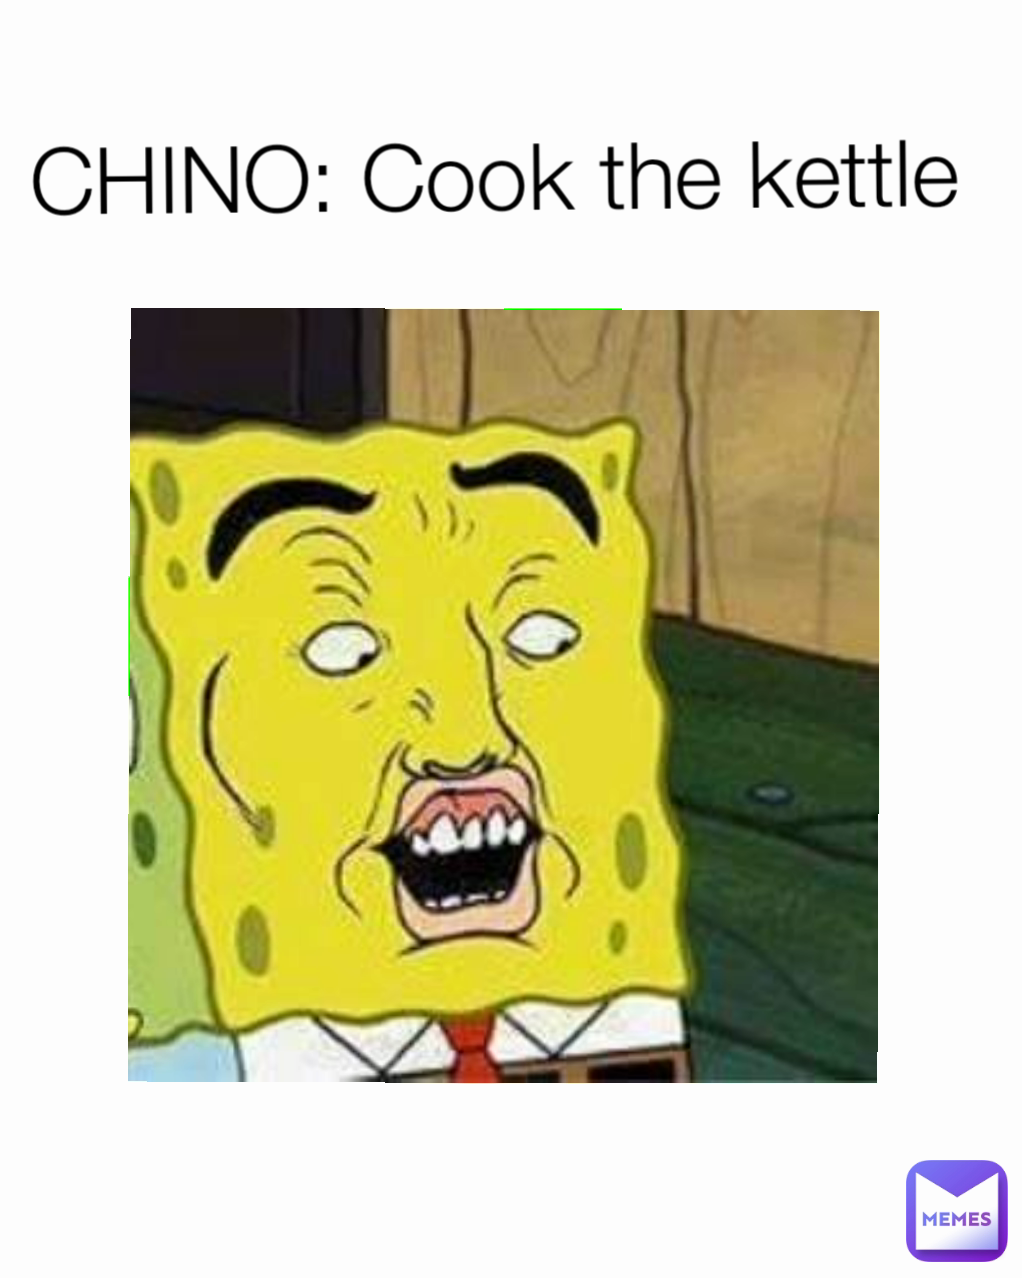 CHINO: Cook the kettle